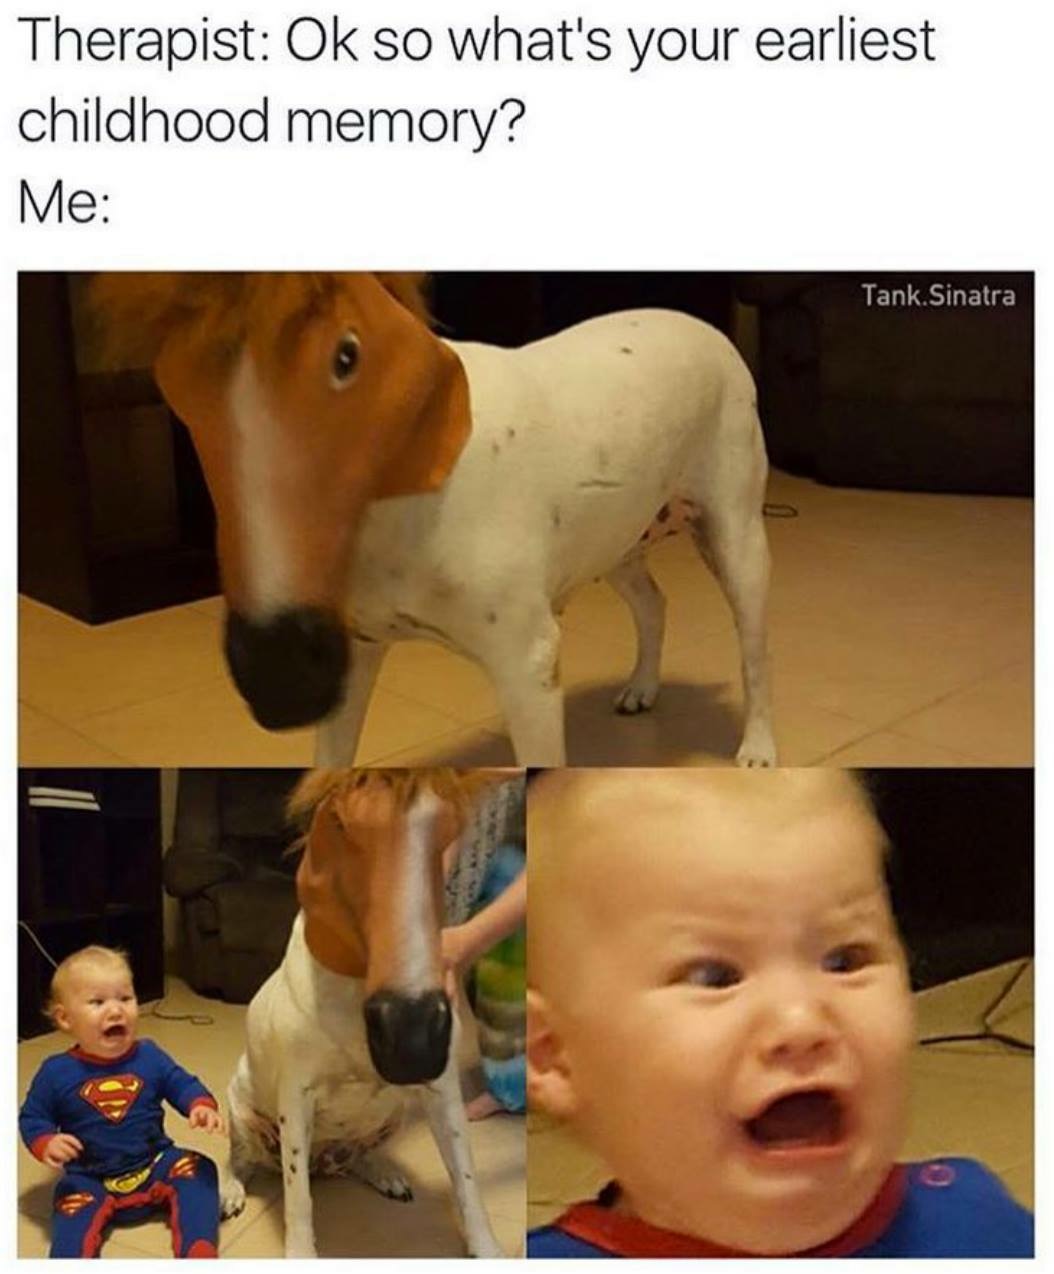 memes- funny memes to make you laugh - Therapist Ok so what's your earliest childhood memory? Me Tank Sinatra